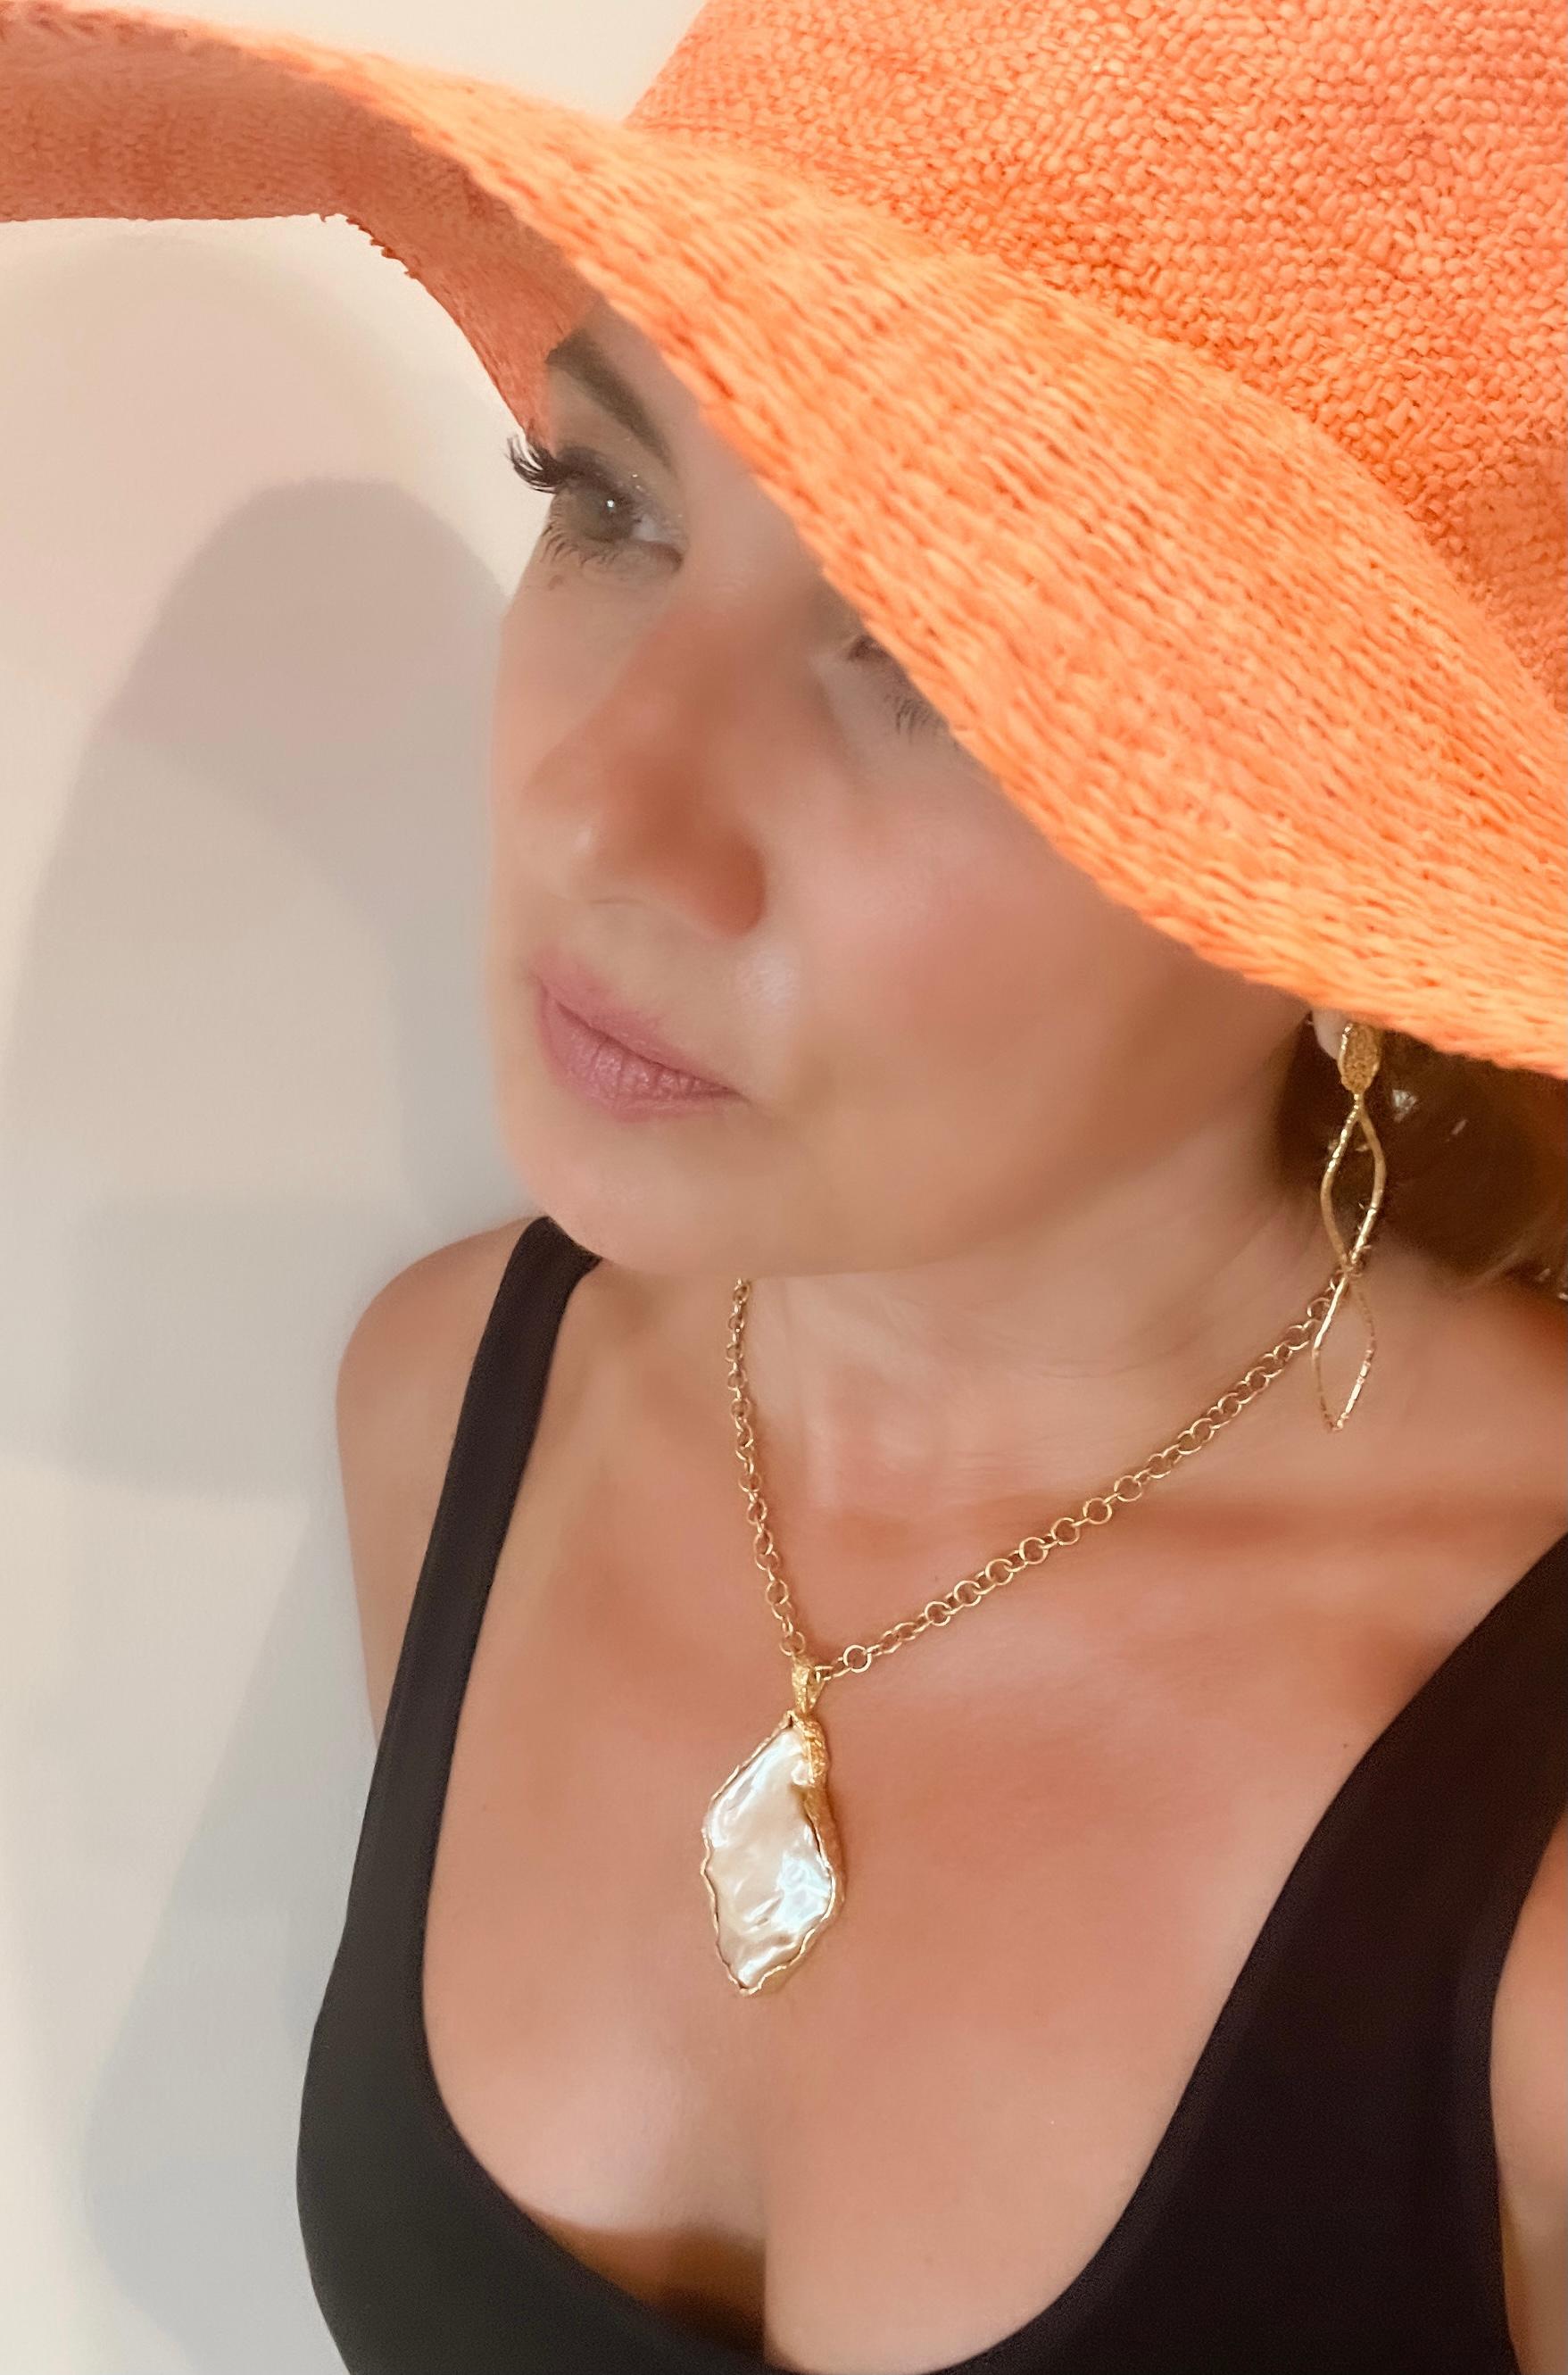 22k gold reversible Kashi Pearl and Diamond Pendent is set in an organic bezel with Tagili Designs Signature finish. The diamonds set in the pearl elevates your style to the next level. This stunner is sure to set you apart from the rest. The